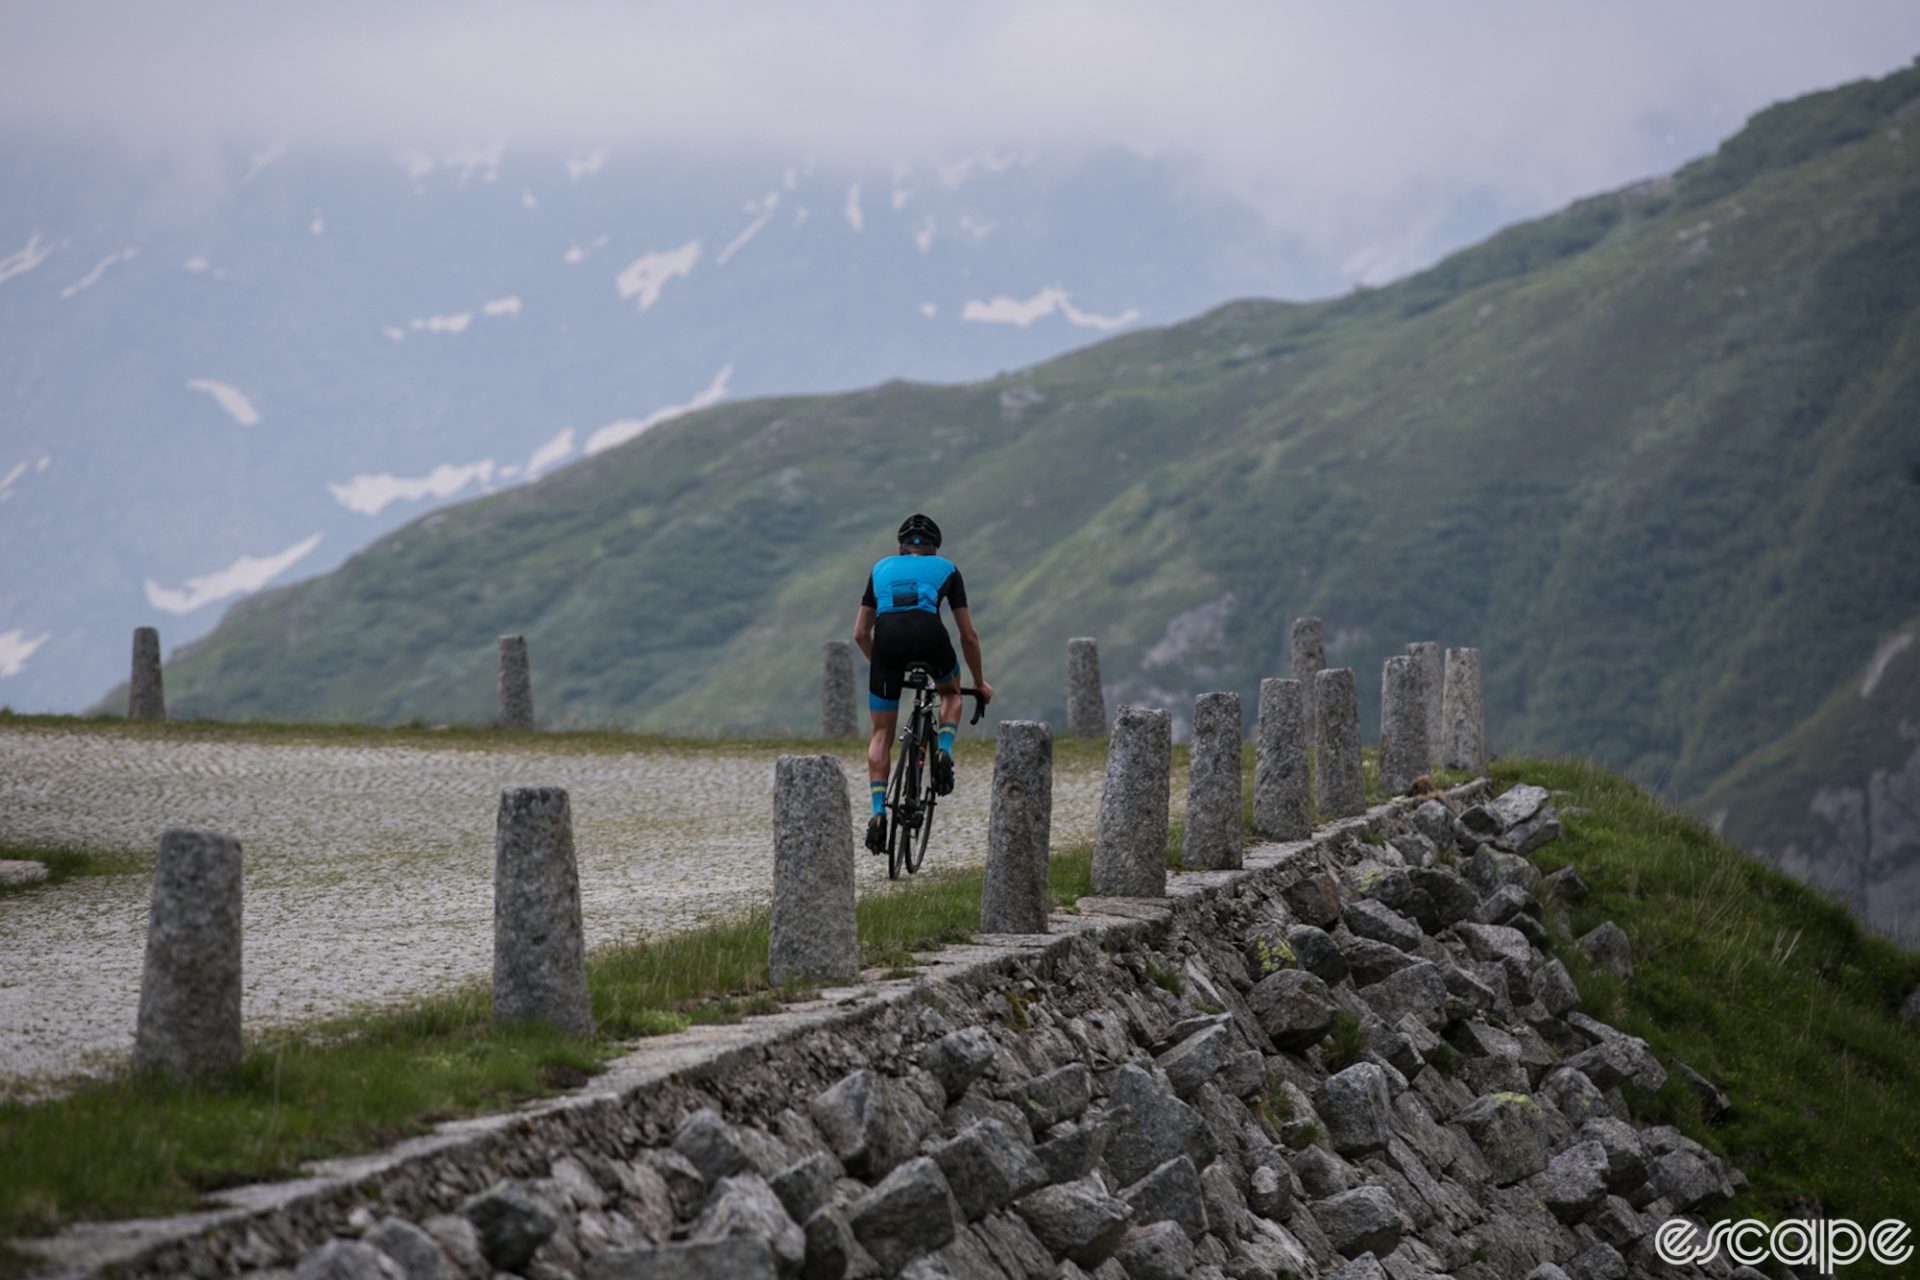 Mike Cotty rides the Gotthard Pass in Switzerland. He's riding away from the camera at a distance, nearing a switchback. The surface is paved in cobblestones and conical stone bollards frame the roadside above a steep drop. Misty mountains loom in the background.